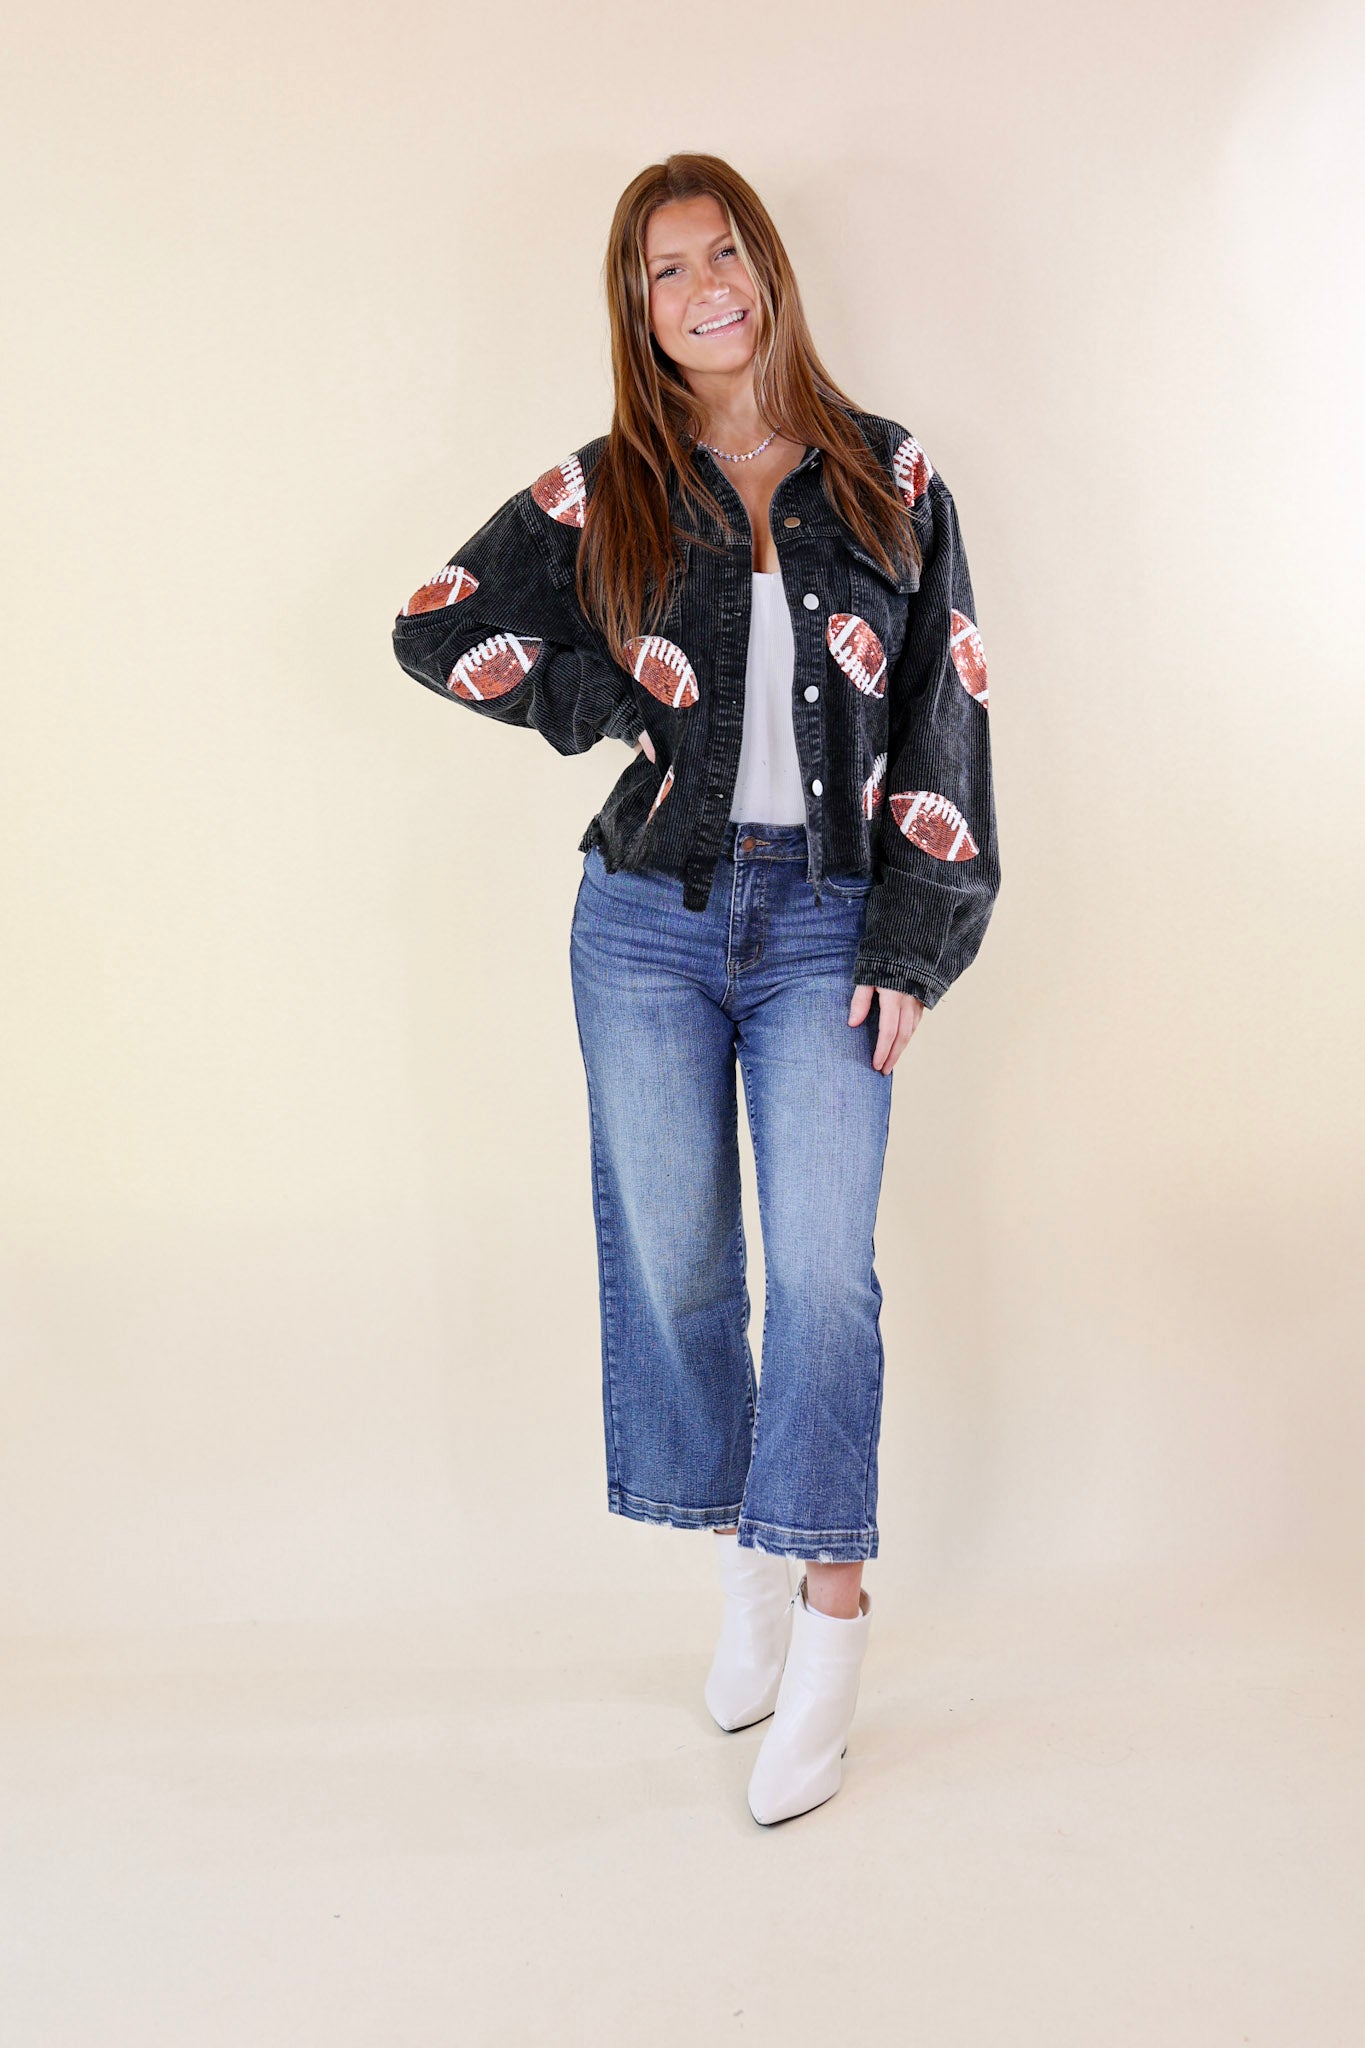 Gameday Ready Corduroy Shacket with Sequin Football Patches in Black - Giddy Up Glamour Boutique